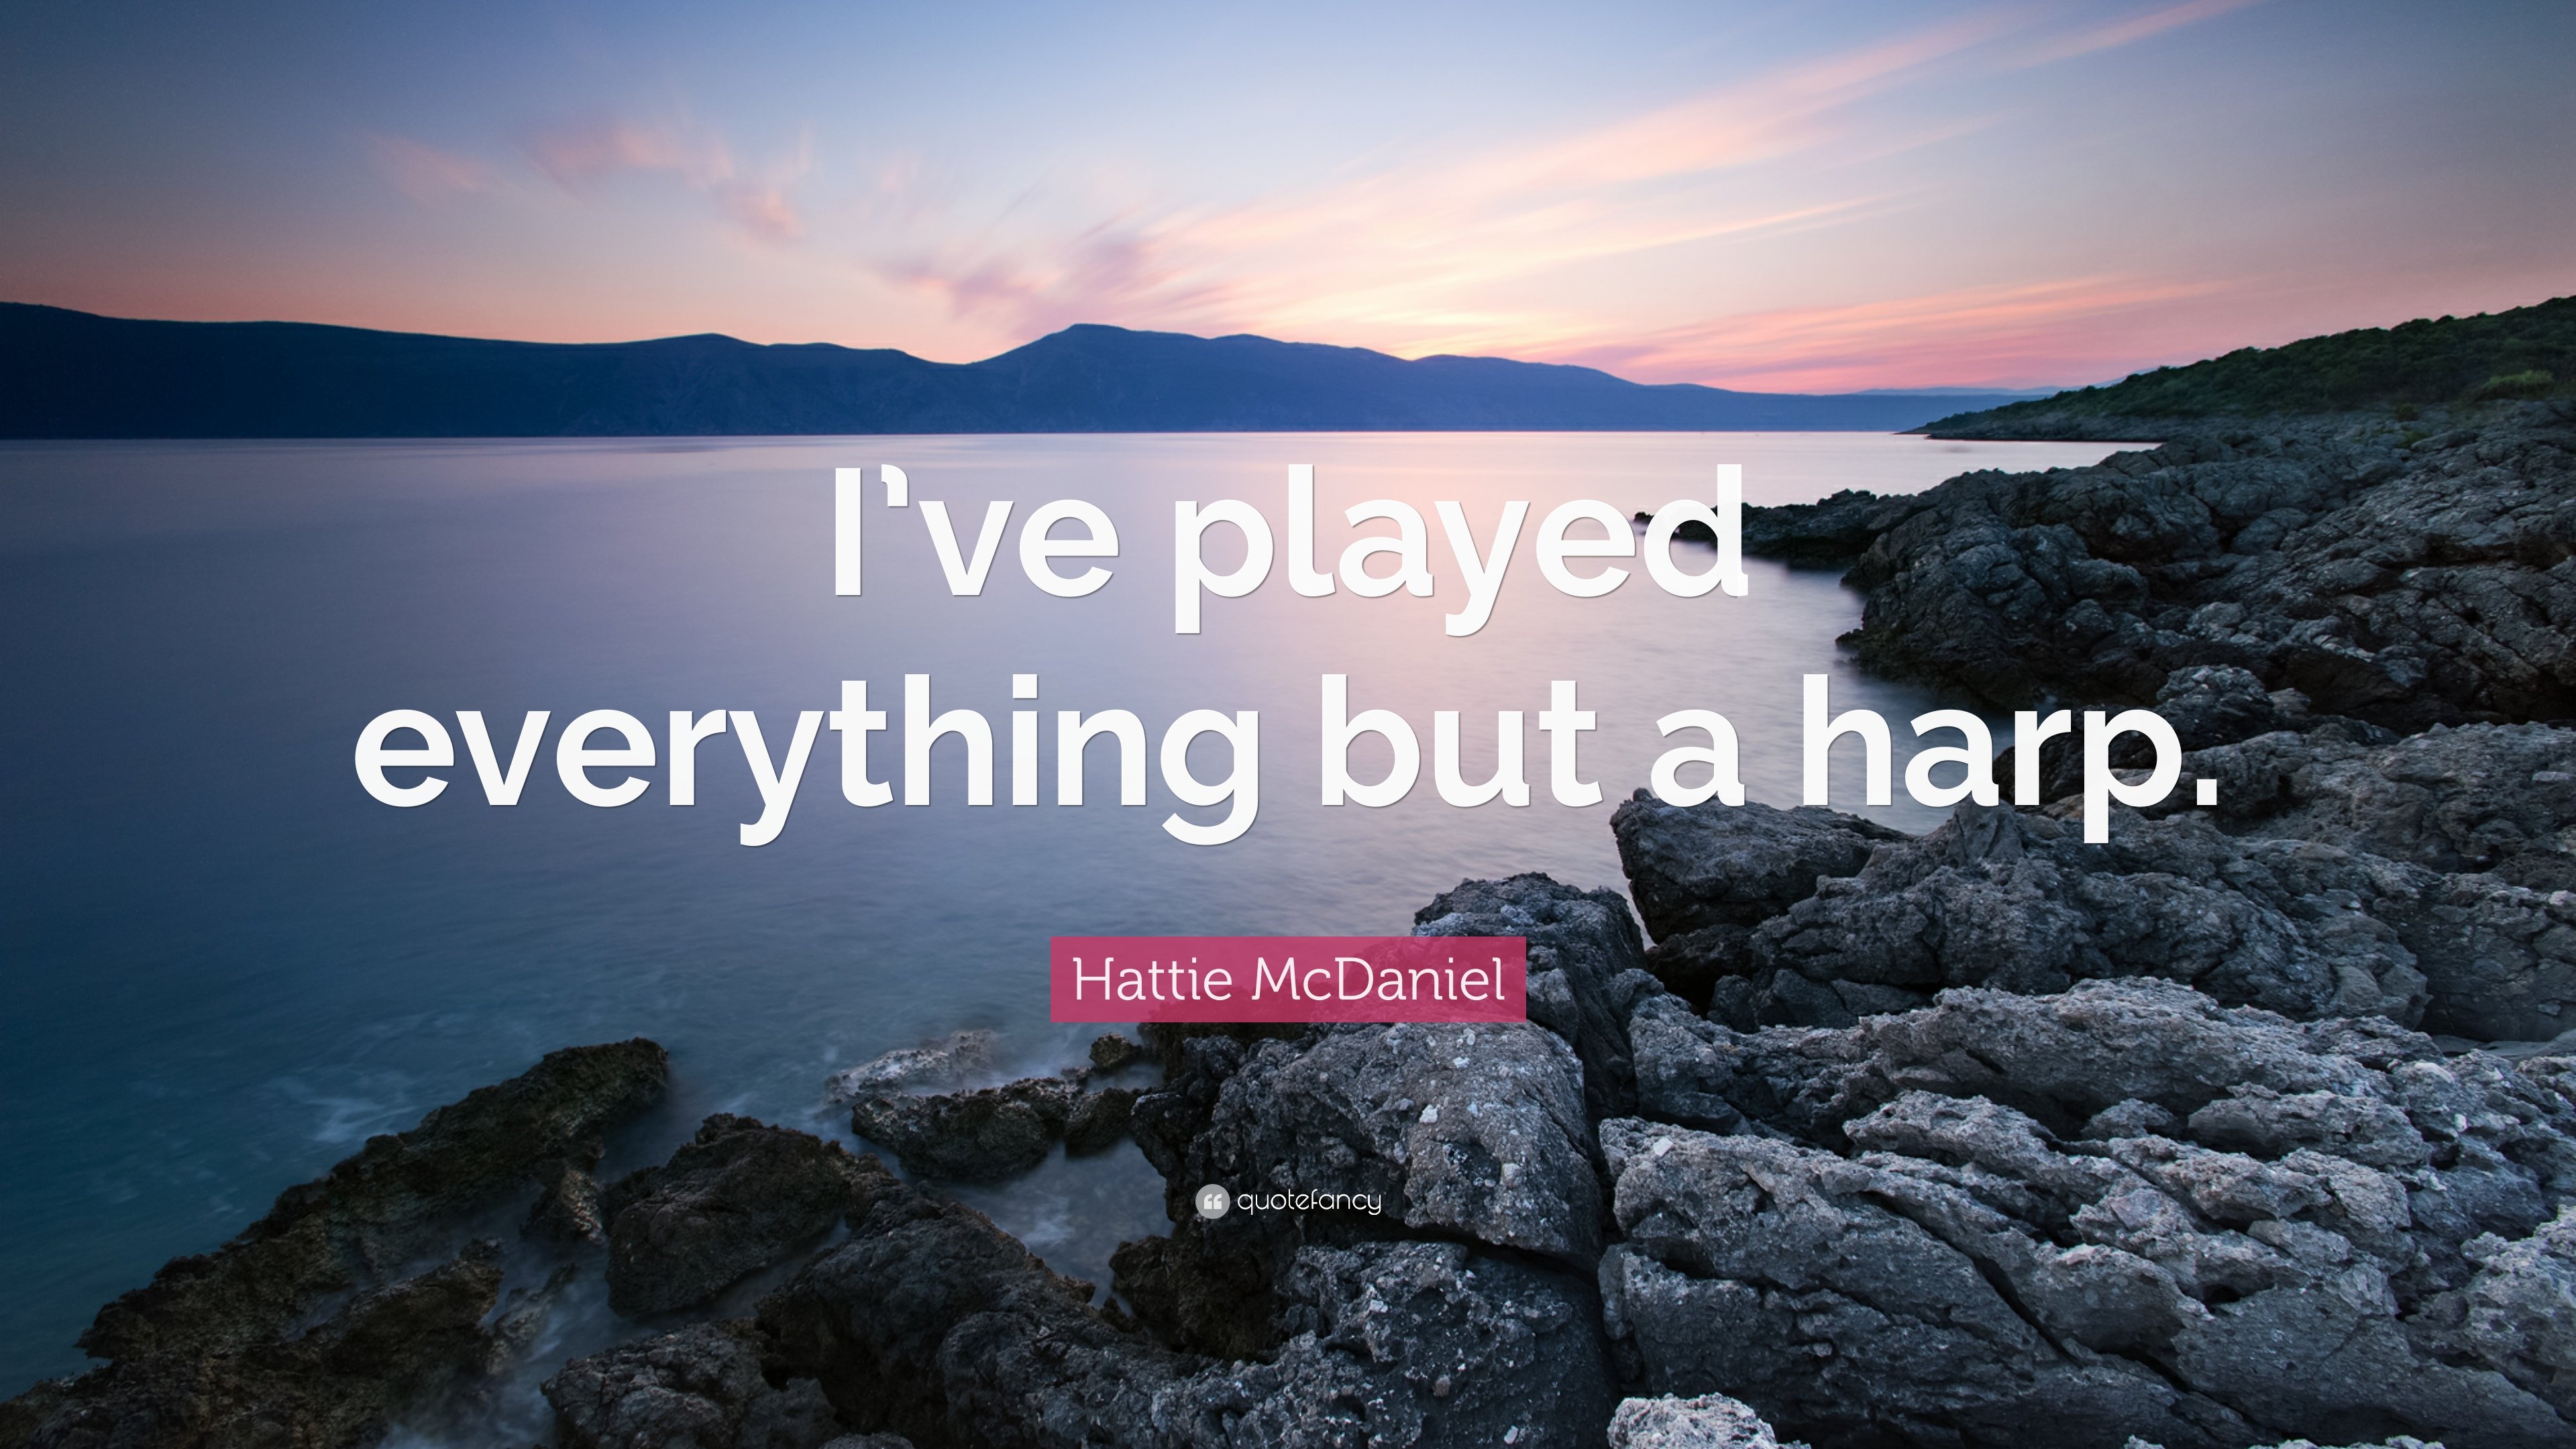 Hattie McDaniel Quote: “I've played everything but a harp.” 7